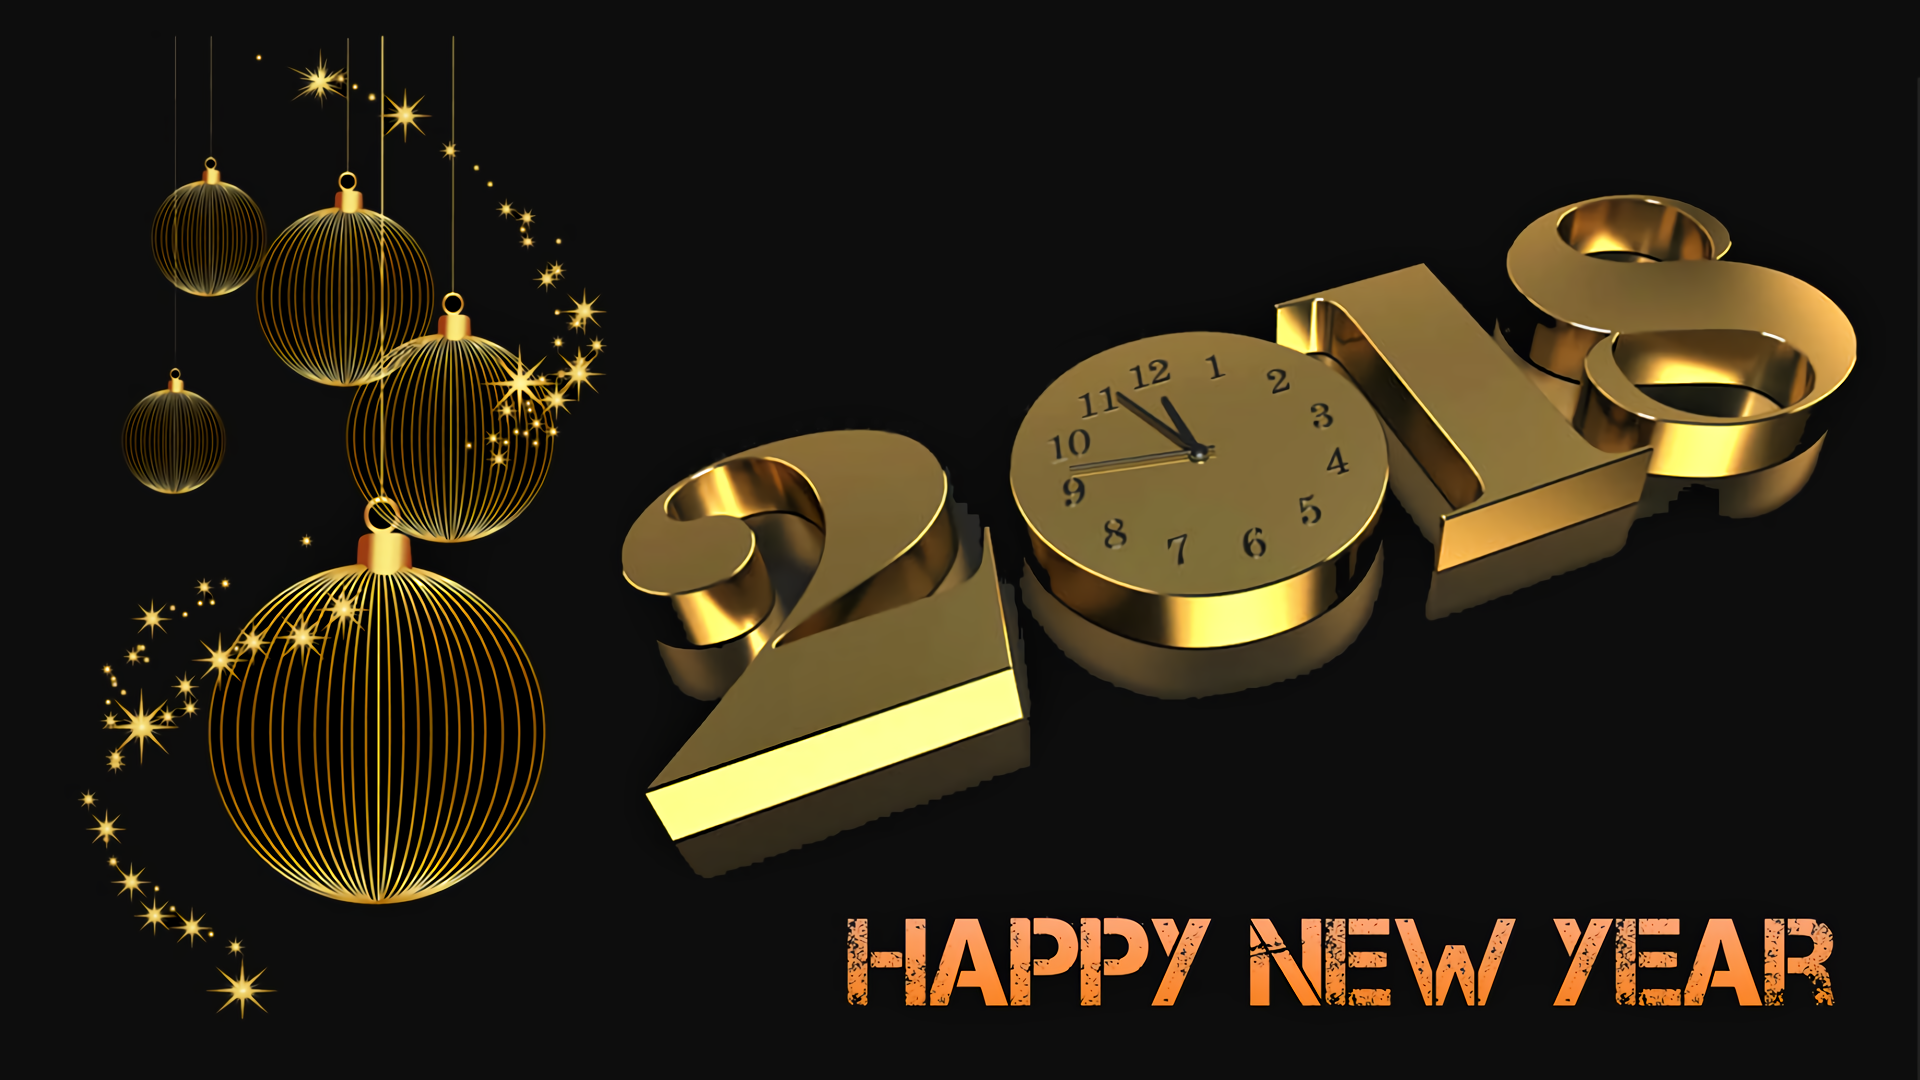 Happy New Year Holiday New Year New Year 2018 1920x1080